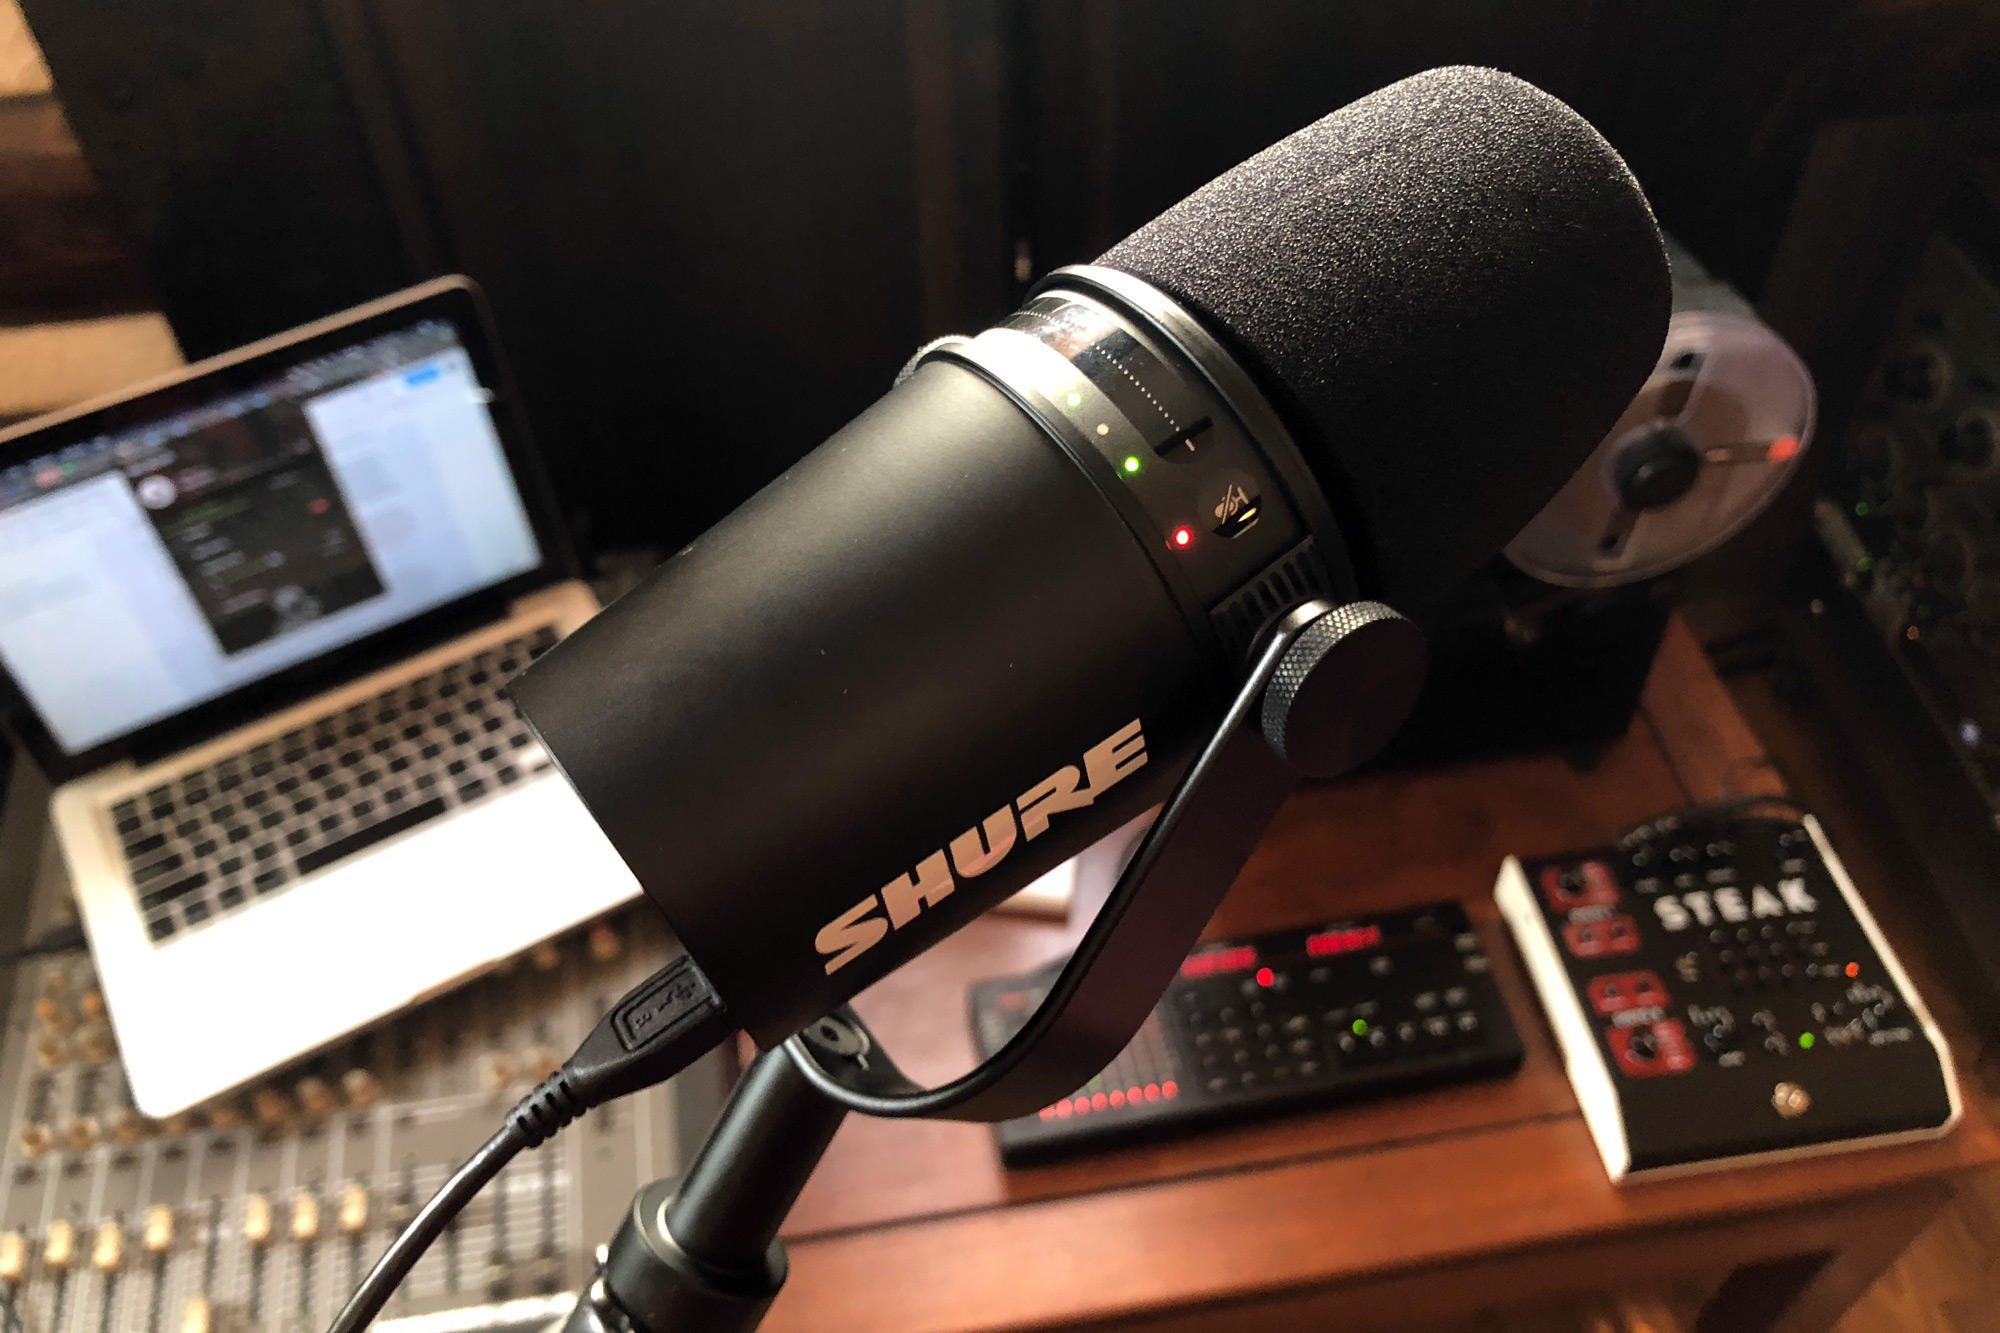 Shure MV7 Review: Feature-Packed And Ready To Go